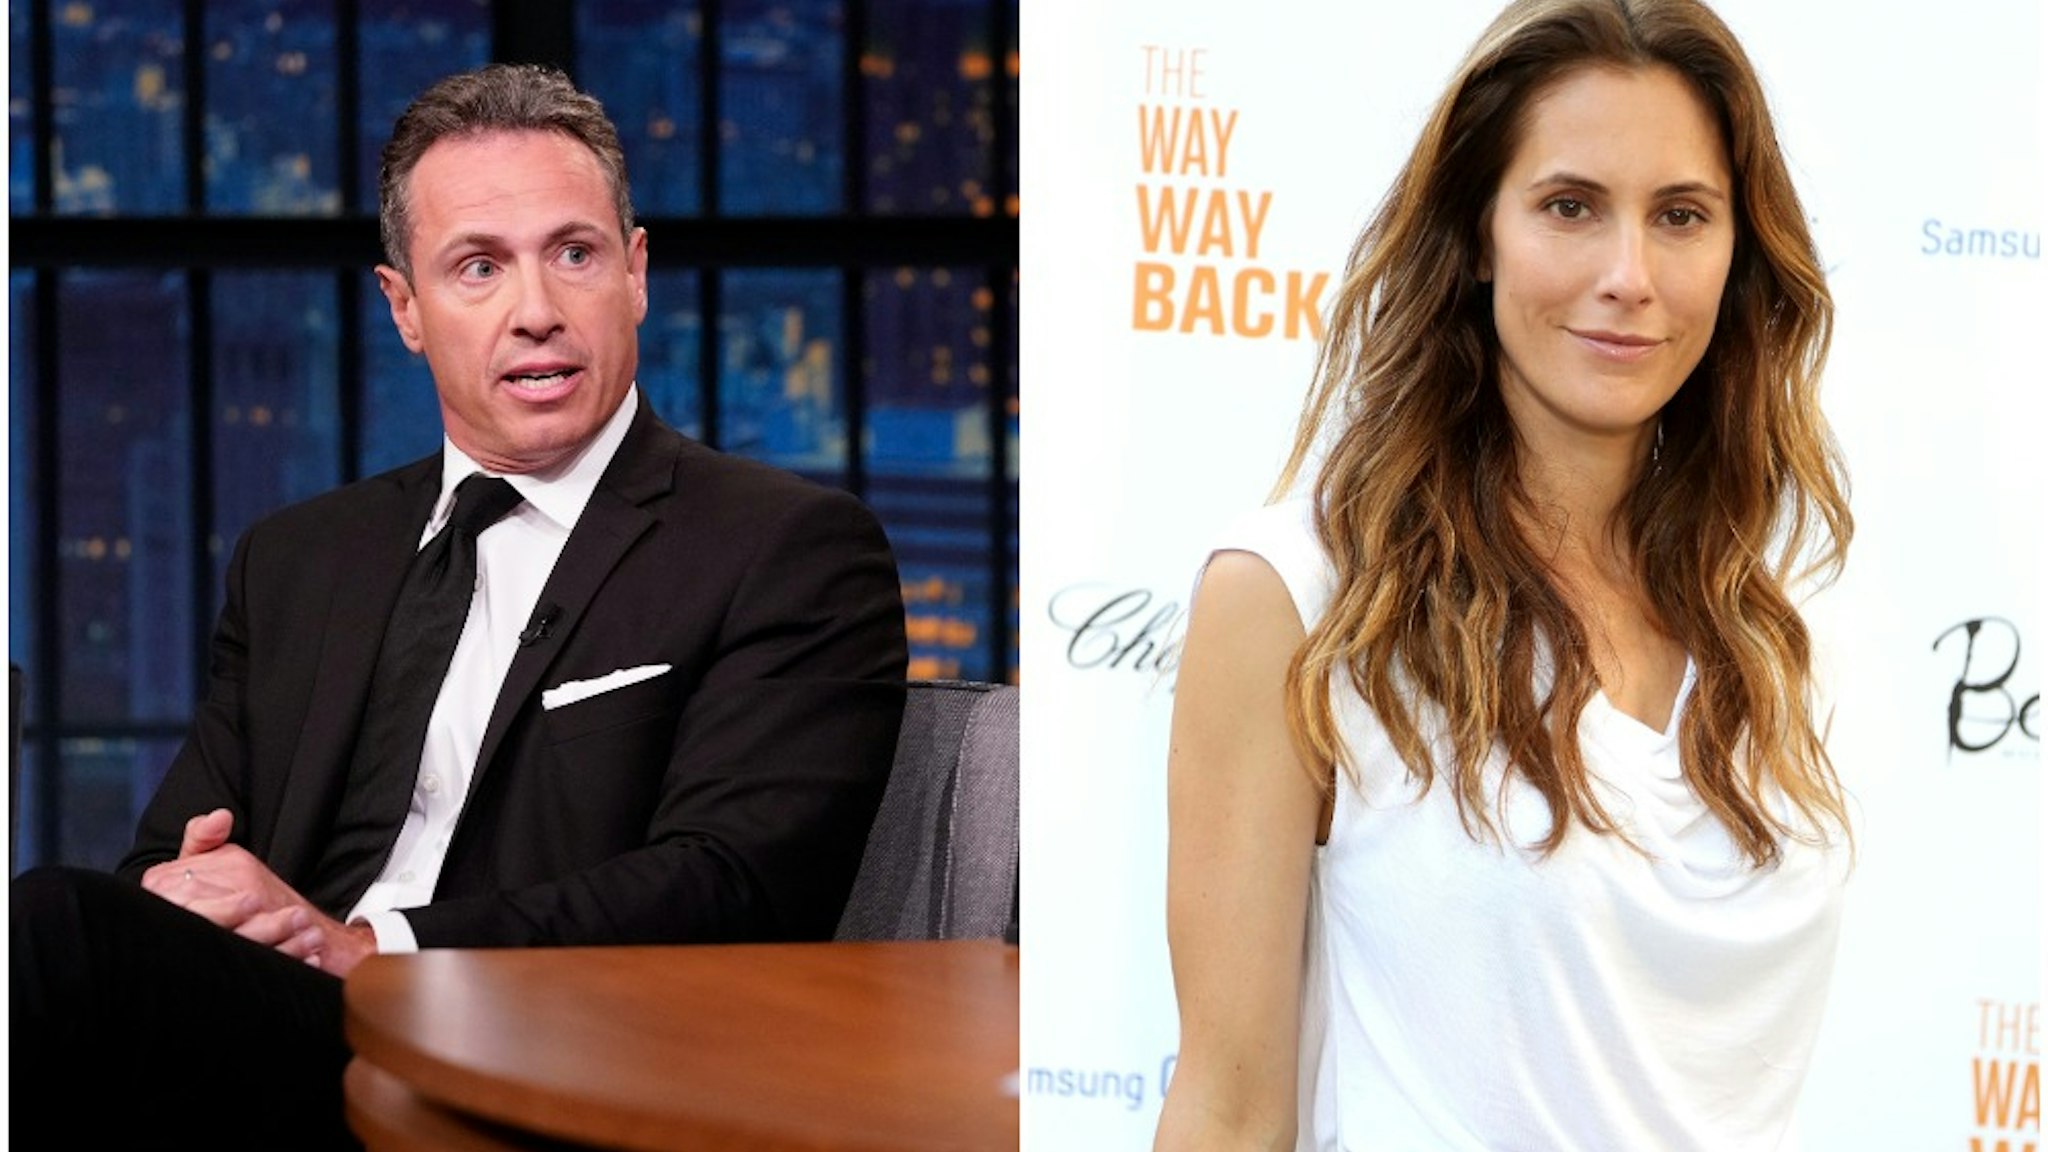 LATE NIGHT WITH SETH MEYERS -- Episode 867 -- Pictured: (l-r) CNN's Chris Cuomo during an interview with host Seth Meyers on August 1, 2019 & EAST HAMPTON, NY - JUNE 29: Christina Greeven Cuomo attends the after party for a special Hamptons screening of "The Way,Way Back" at Goose Creek on June 29, 2013 in East Hampton, New York.